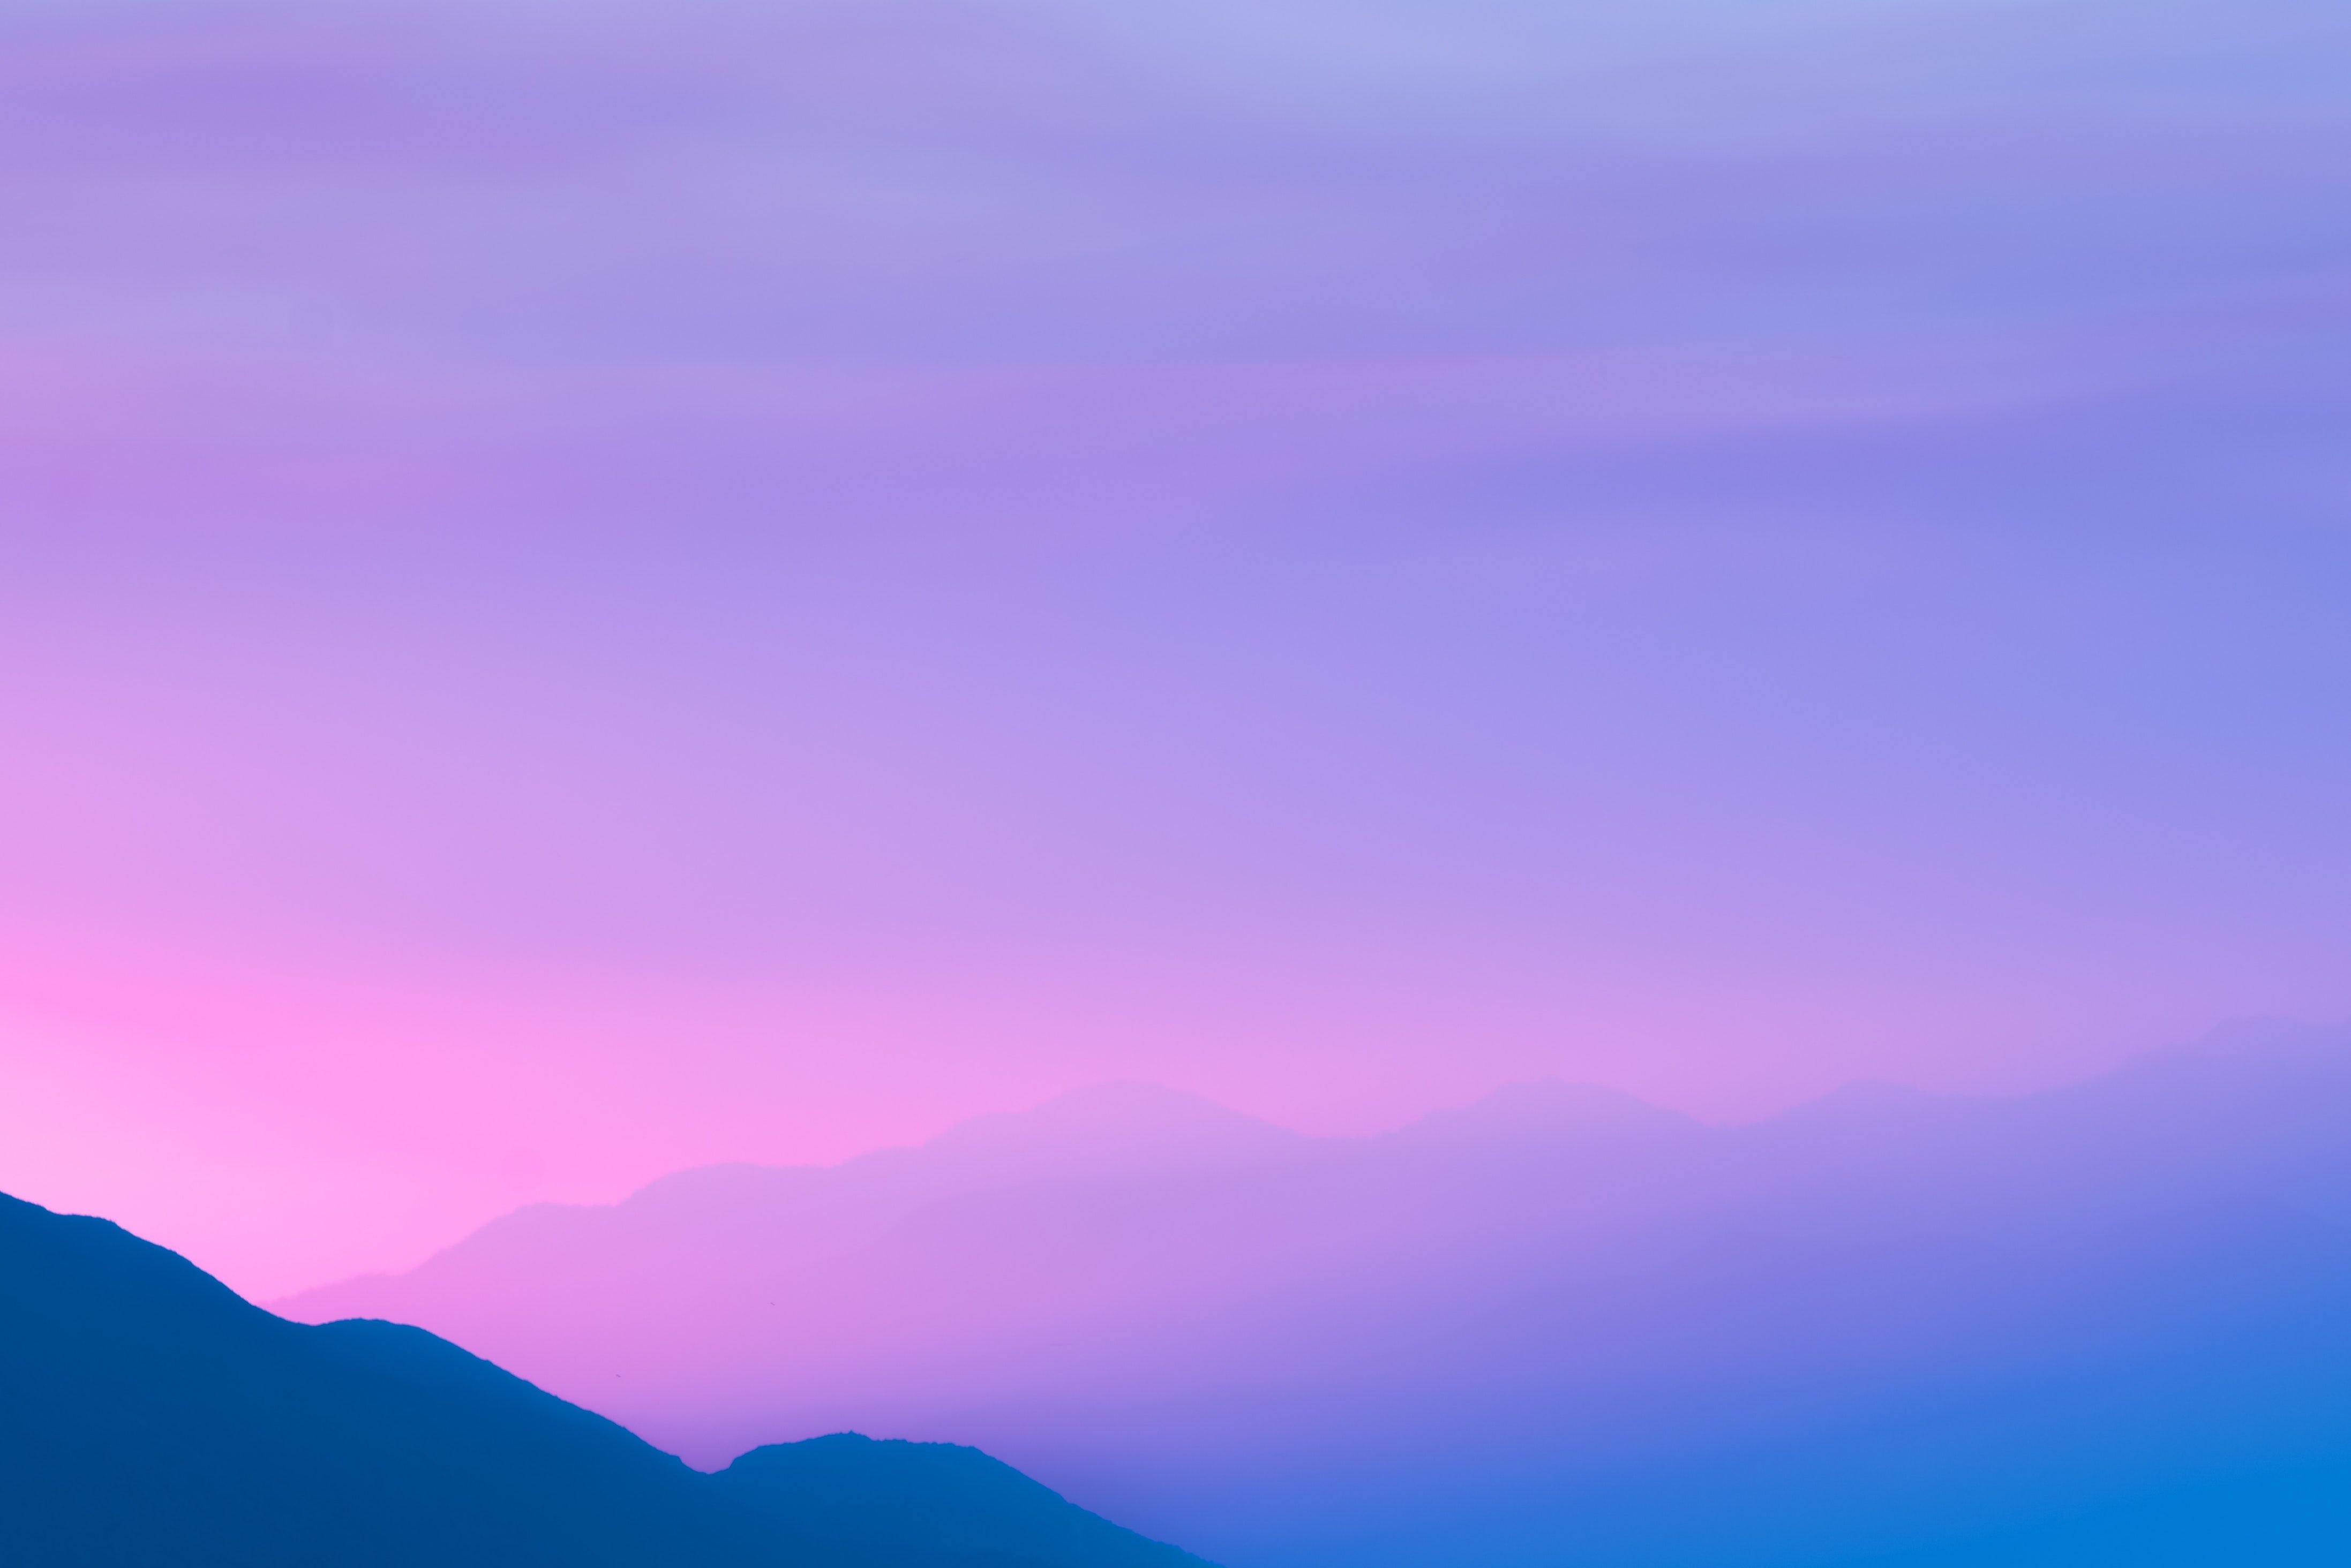 A mountain with pink and purple clouds in the sky - Light purple